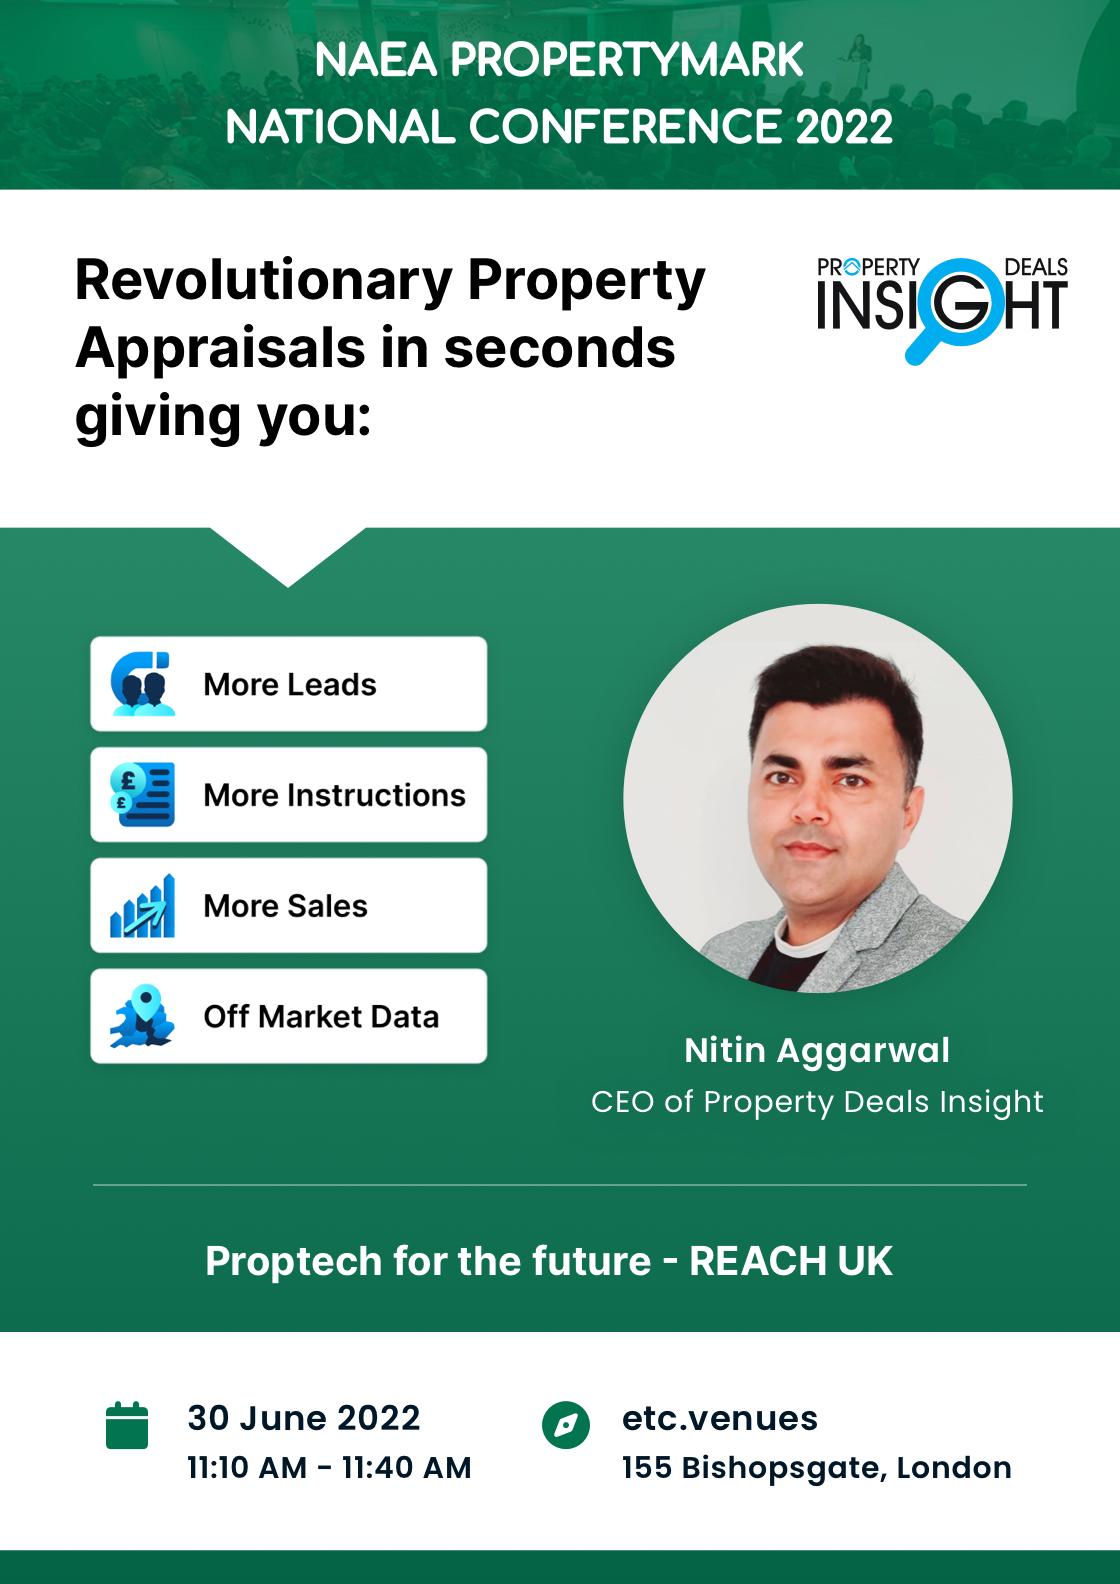 Property Deals Insight at the Propertymark national conference